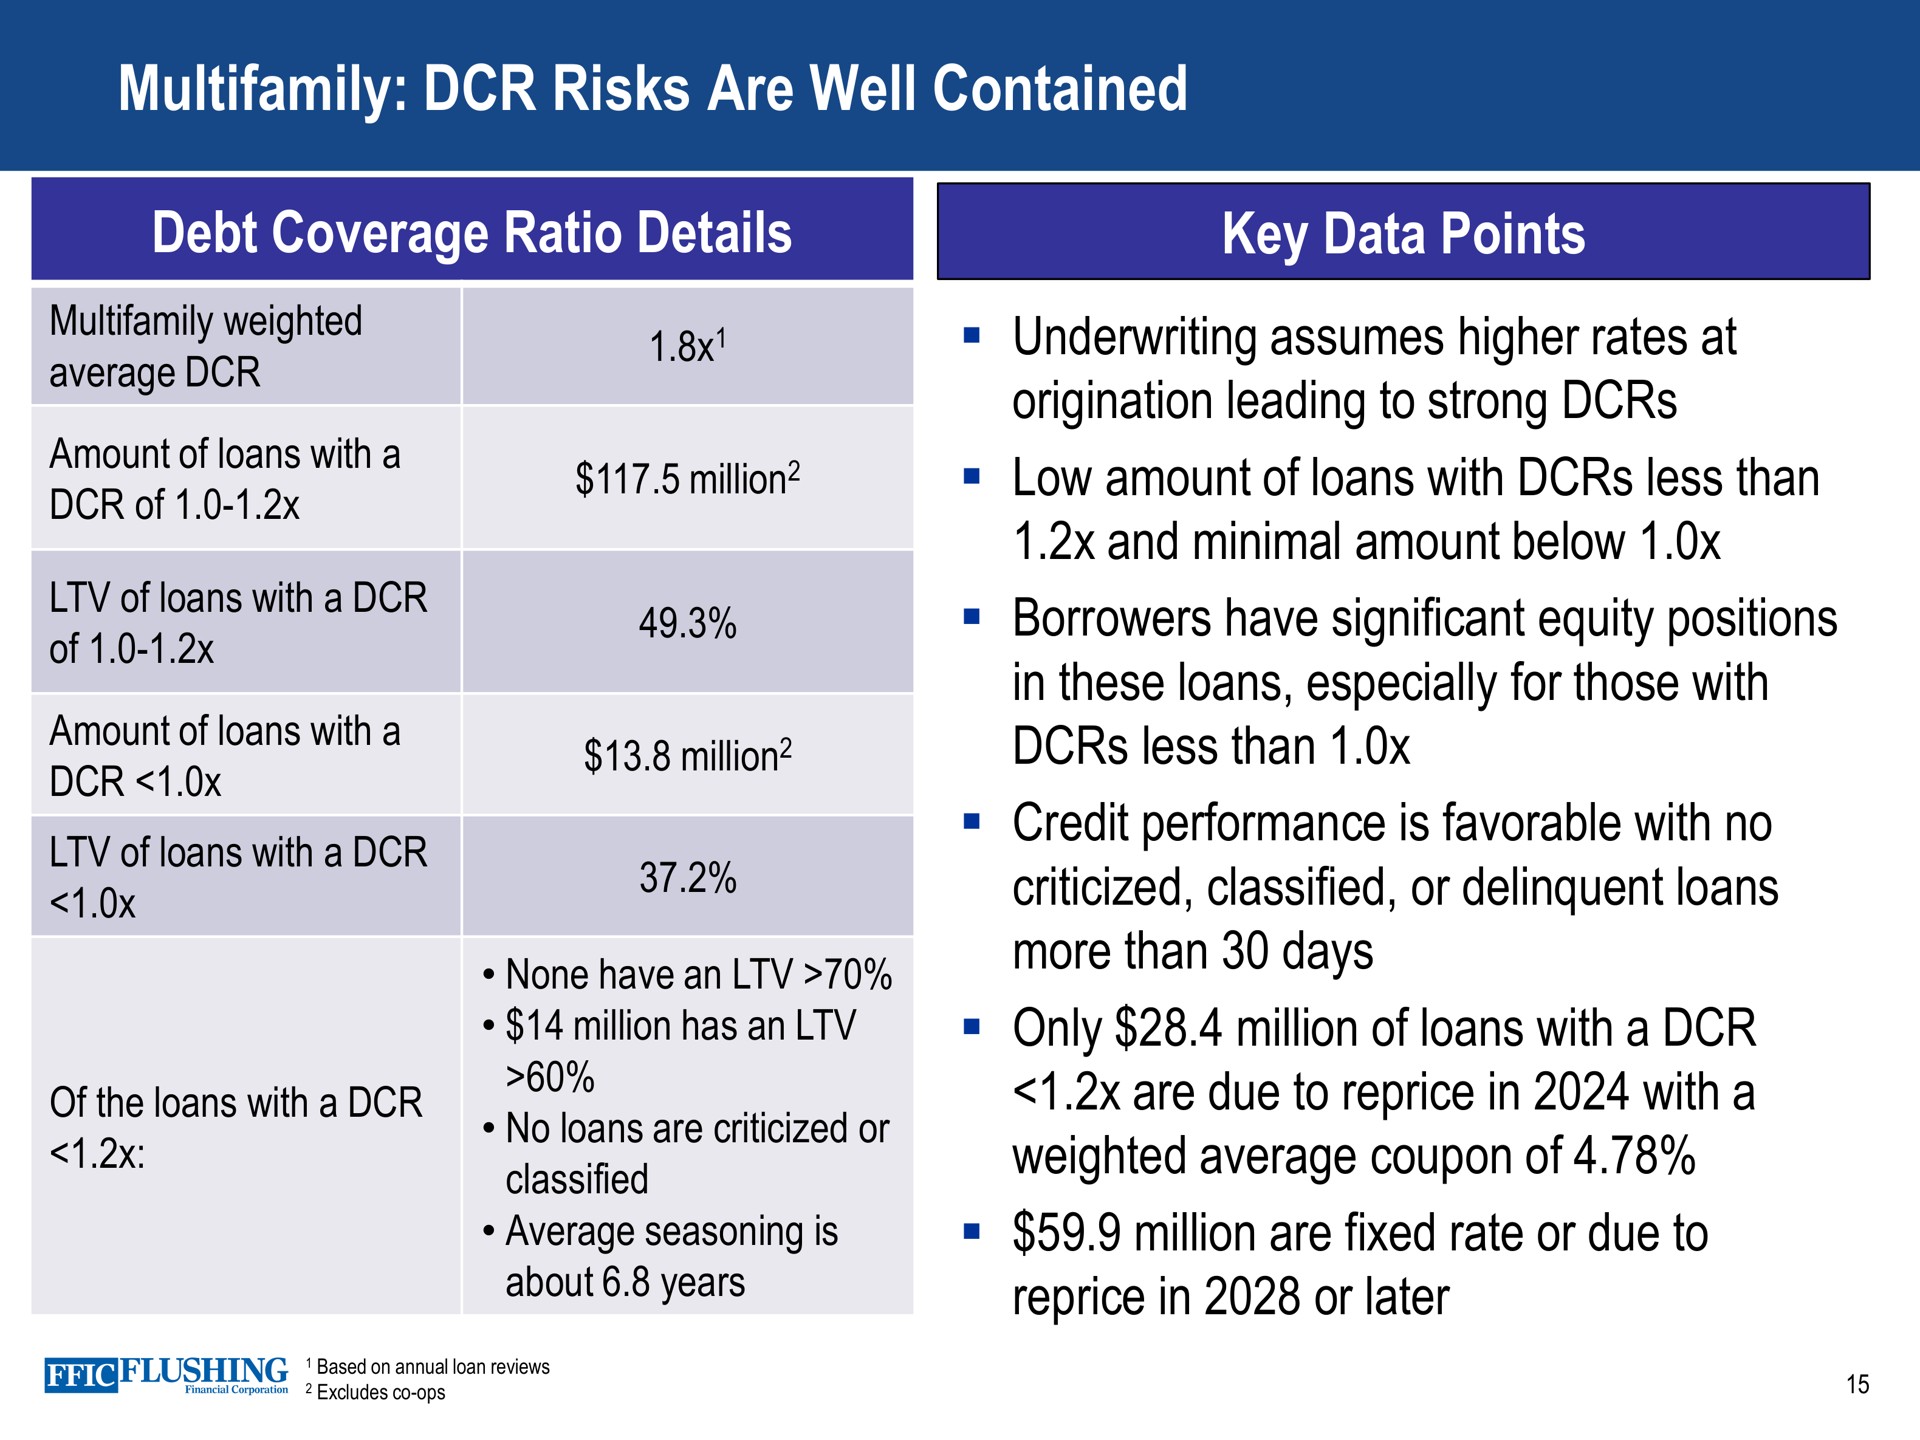 risks are well contained debt coverage ratio details key data points of of underwriting assumes higher rates at origination leading to strong borrowers have significant equity positions in these loans especially for those with less than credit performance is favorable with no criticized classified or delinquent loans more than days only million of loans with a due to reprice in with a weighted average coupon of million fixed rate or due to reprice in or later | Flushing Financial